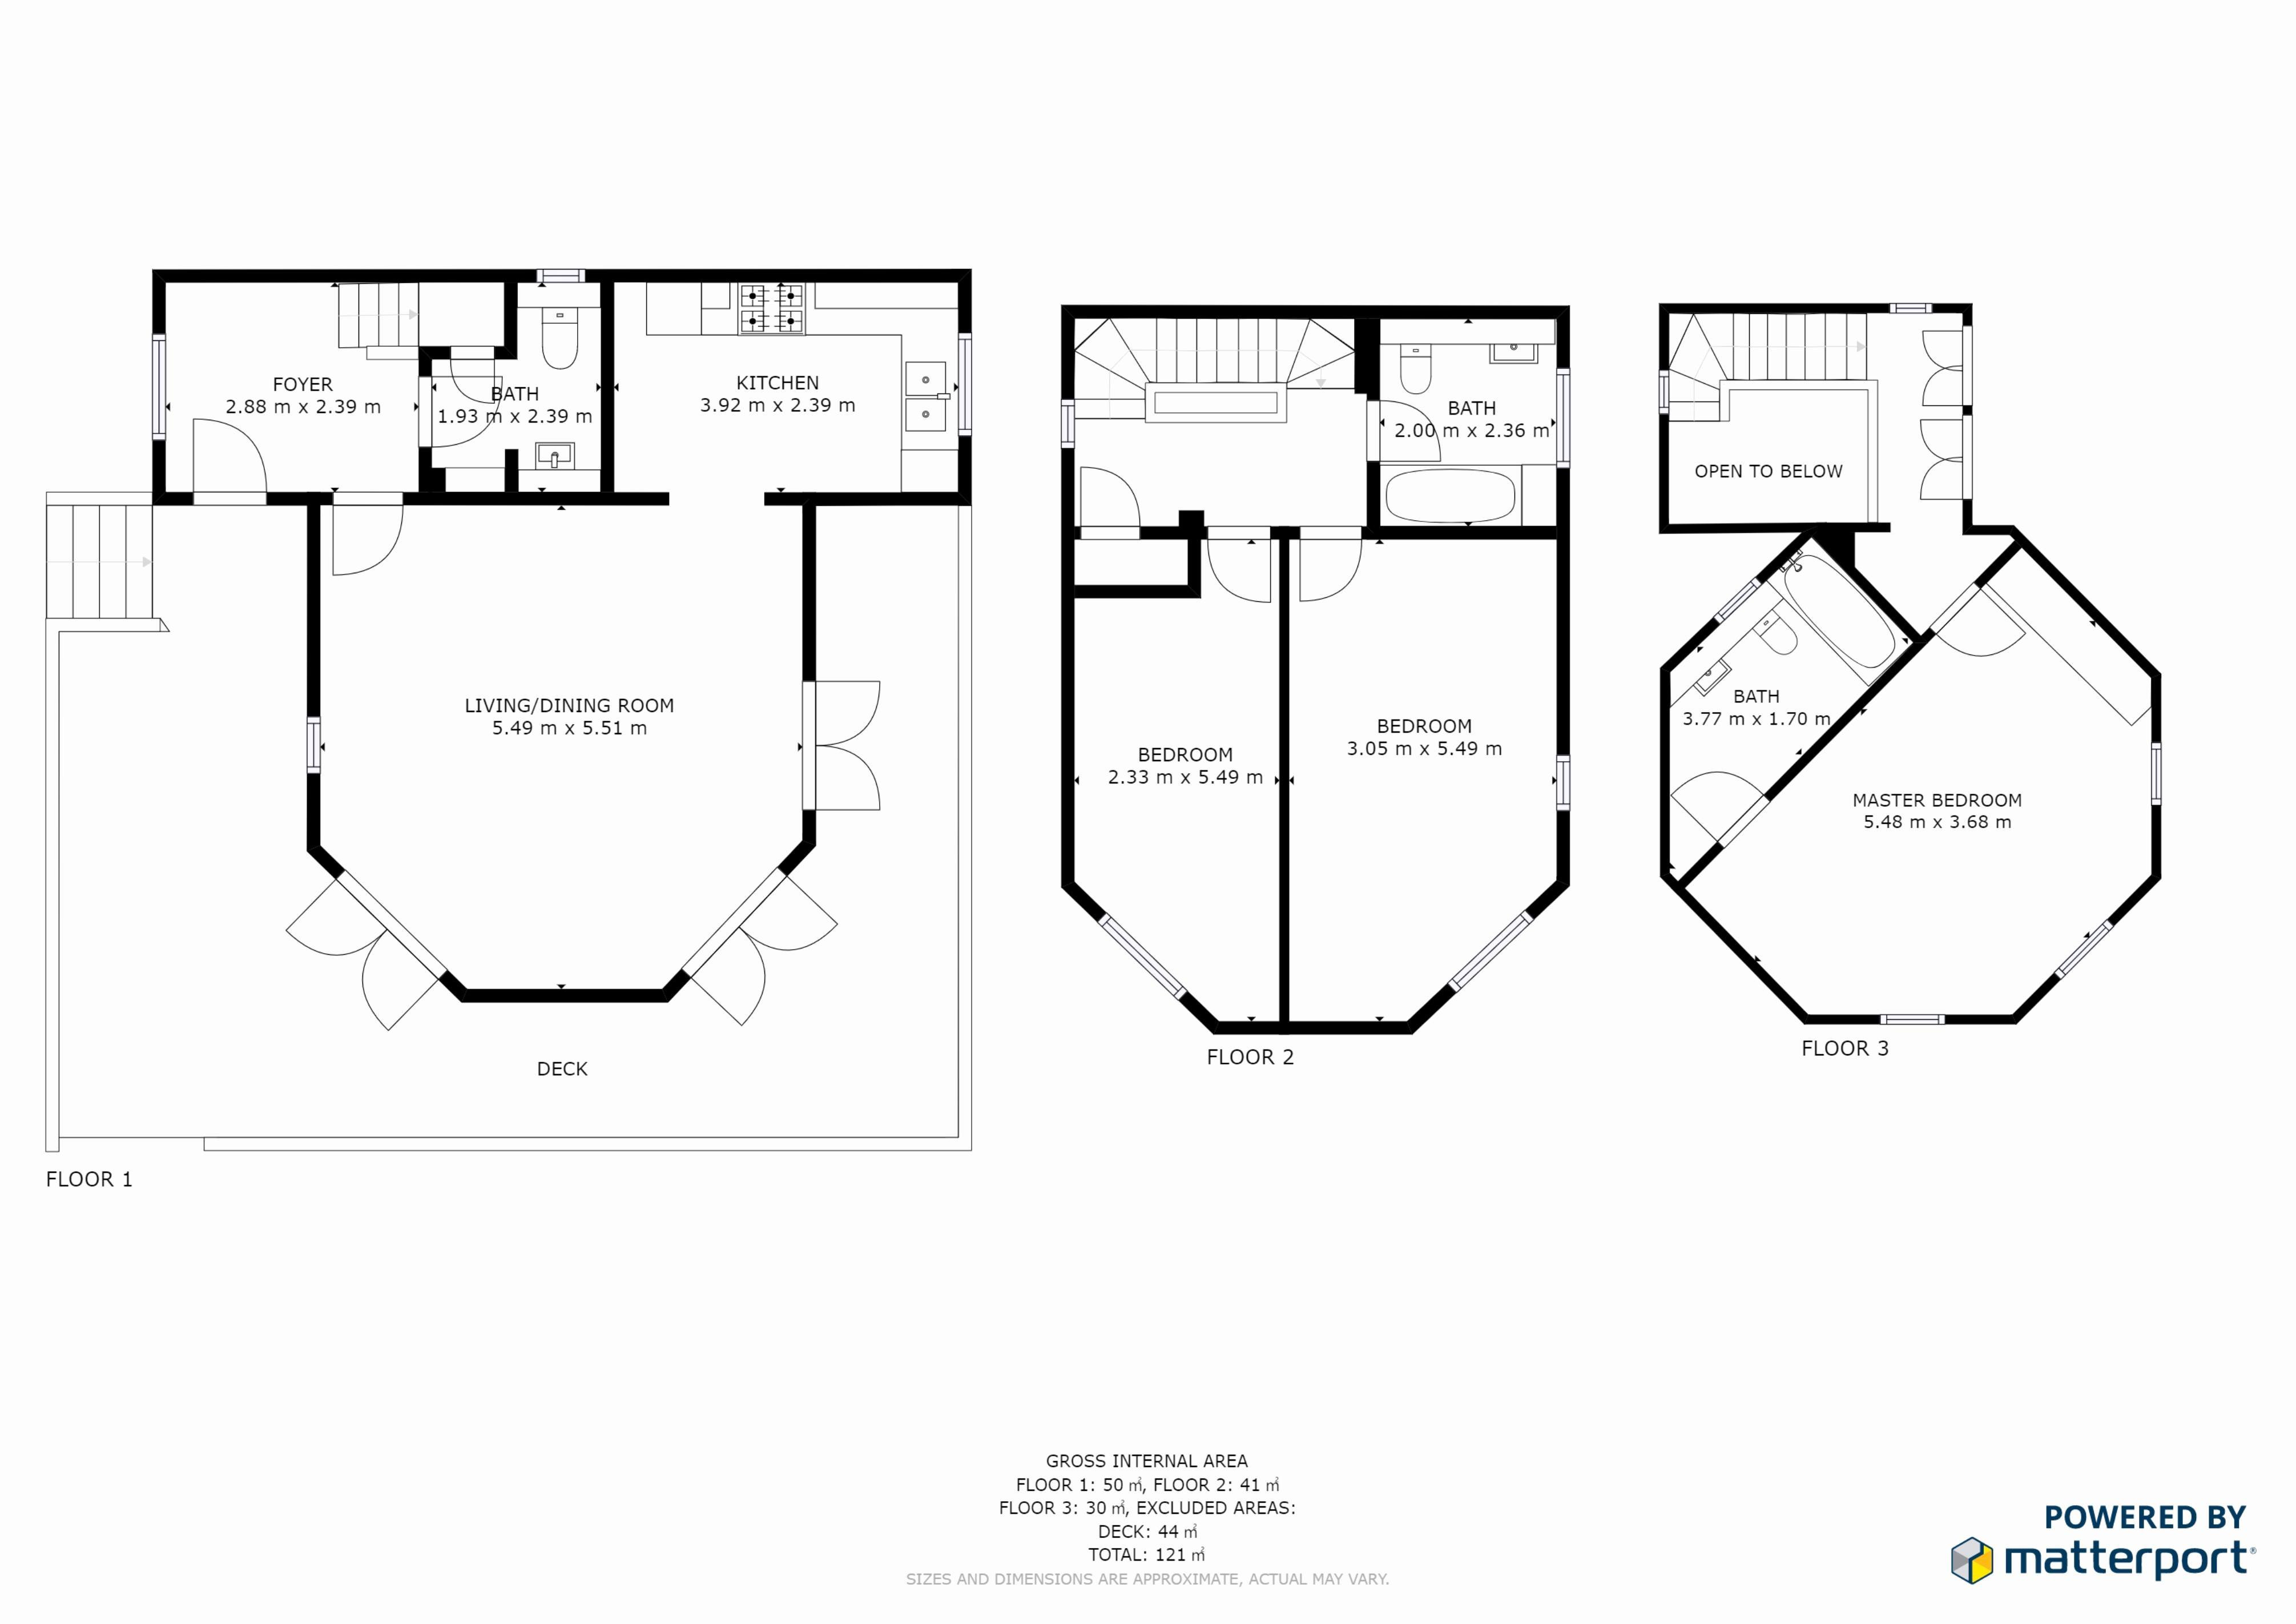 hardwood floor cost calculator canada of house plan cost calculator awesome interior design construction cost for house plan cost calculator awesome home building plans canada elegant inspirational pool house home